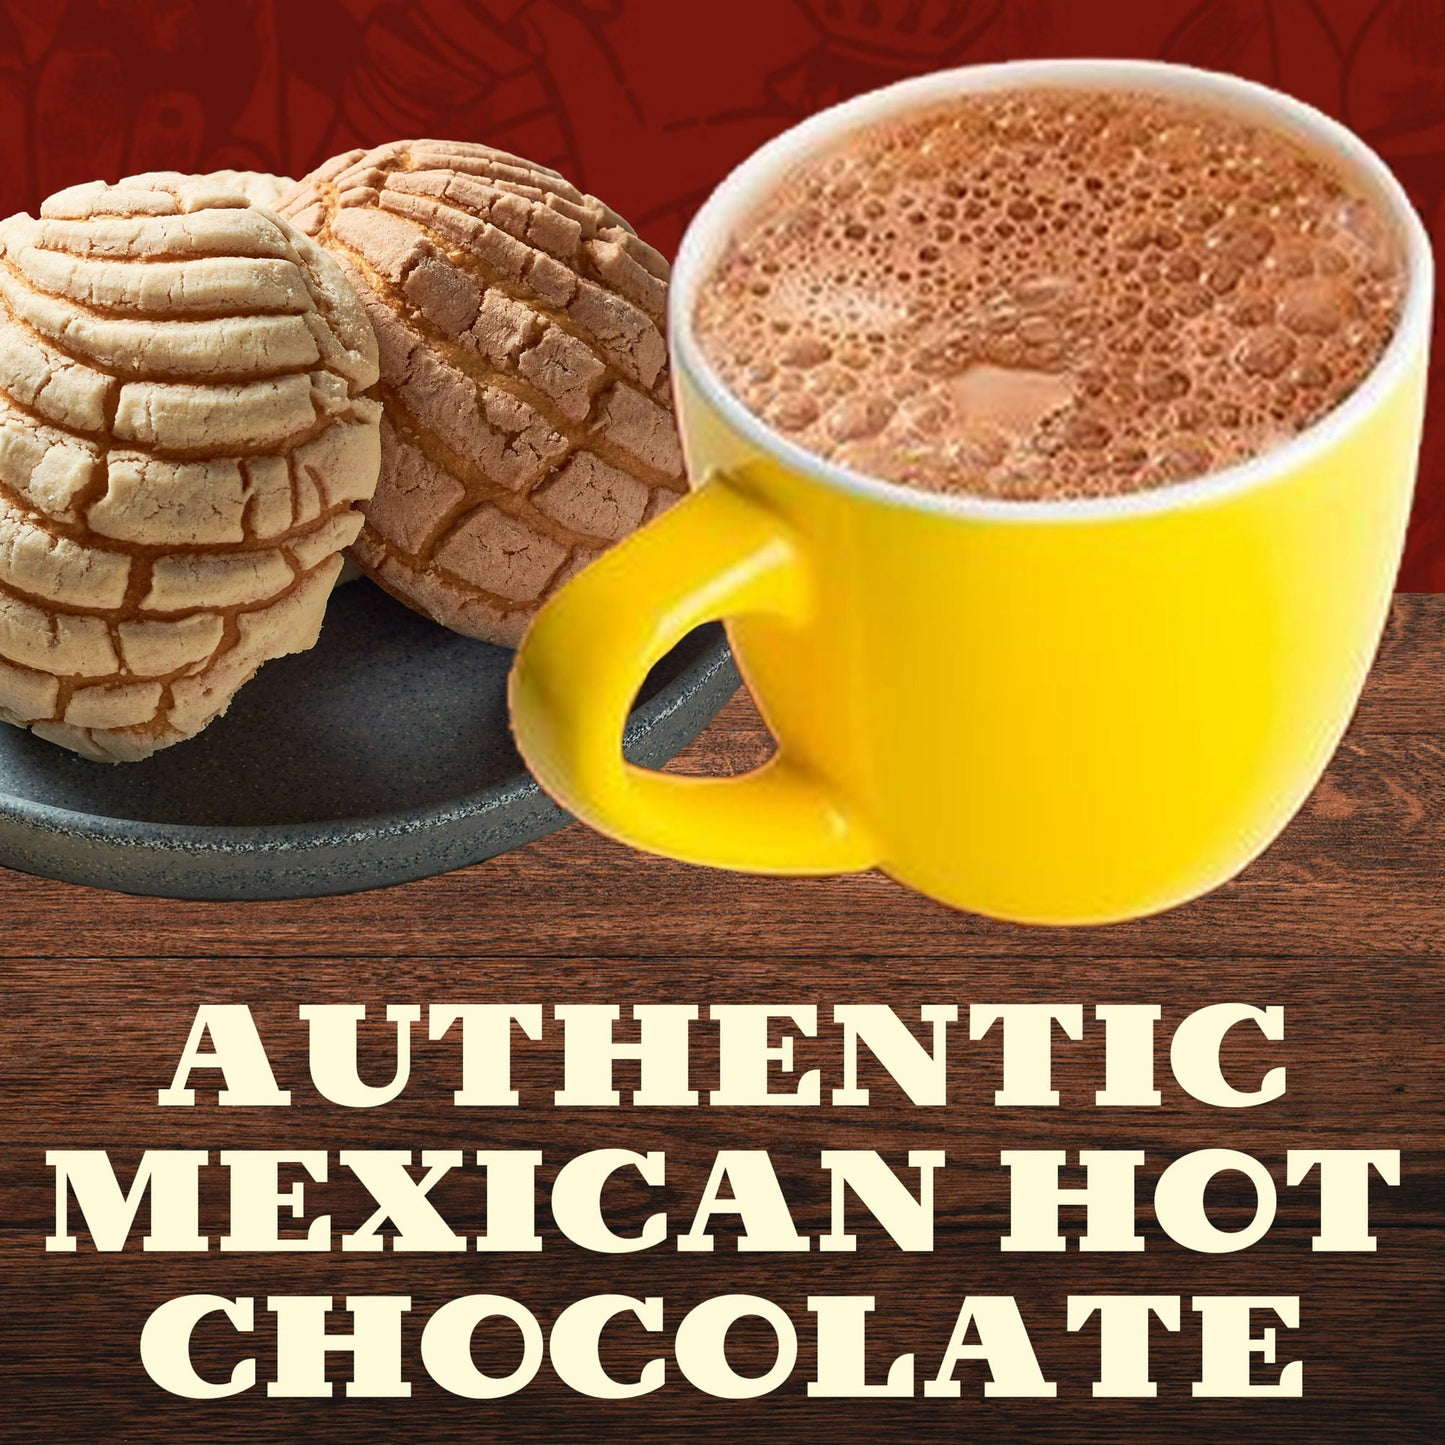 19 oz Nestle Abuelita Mexican Hot Chocolate Tablets